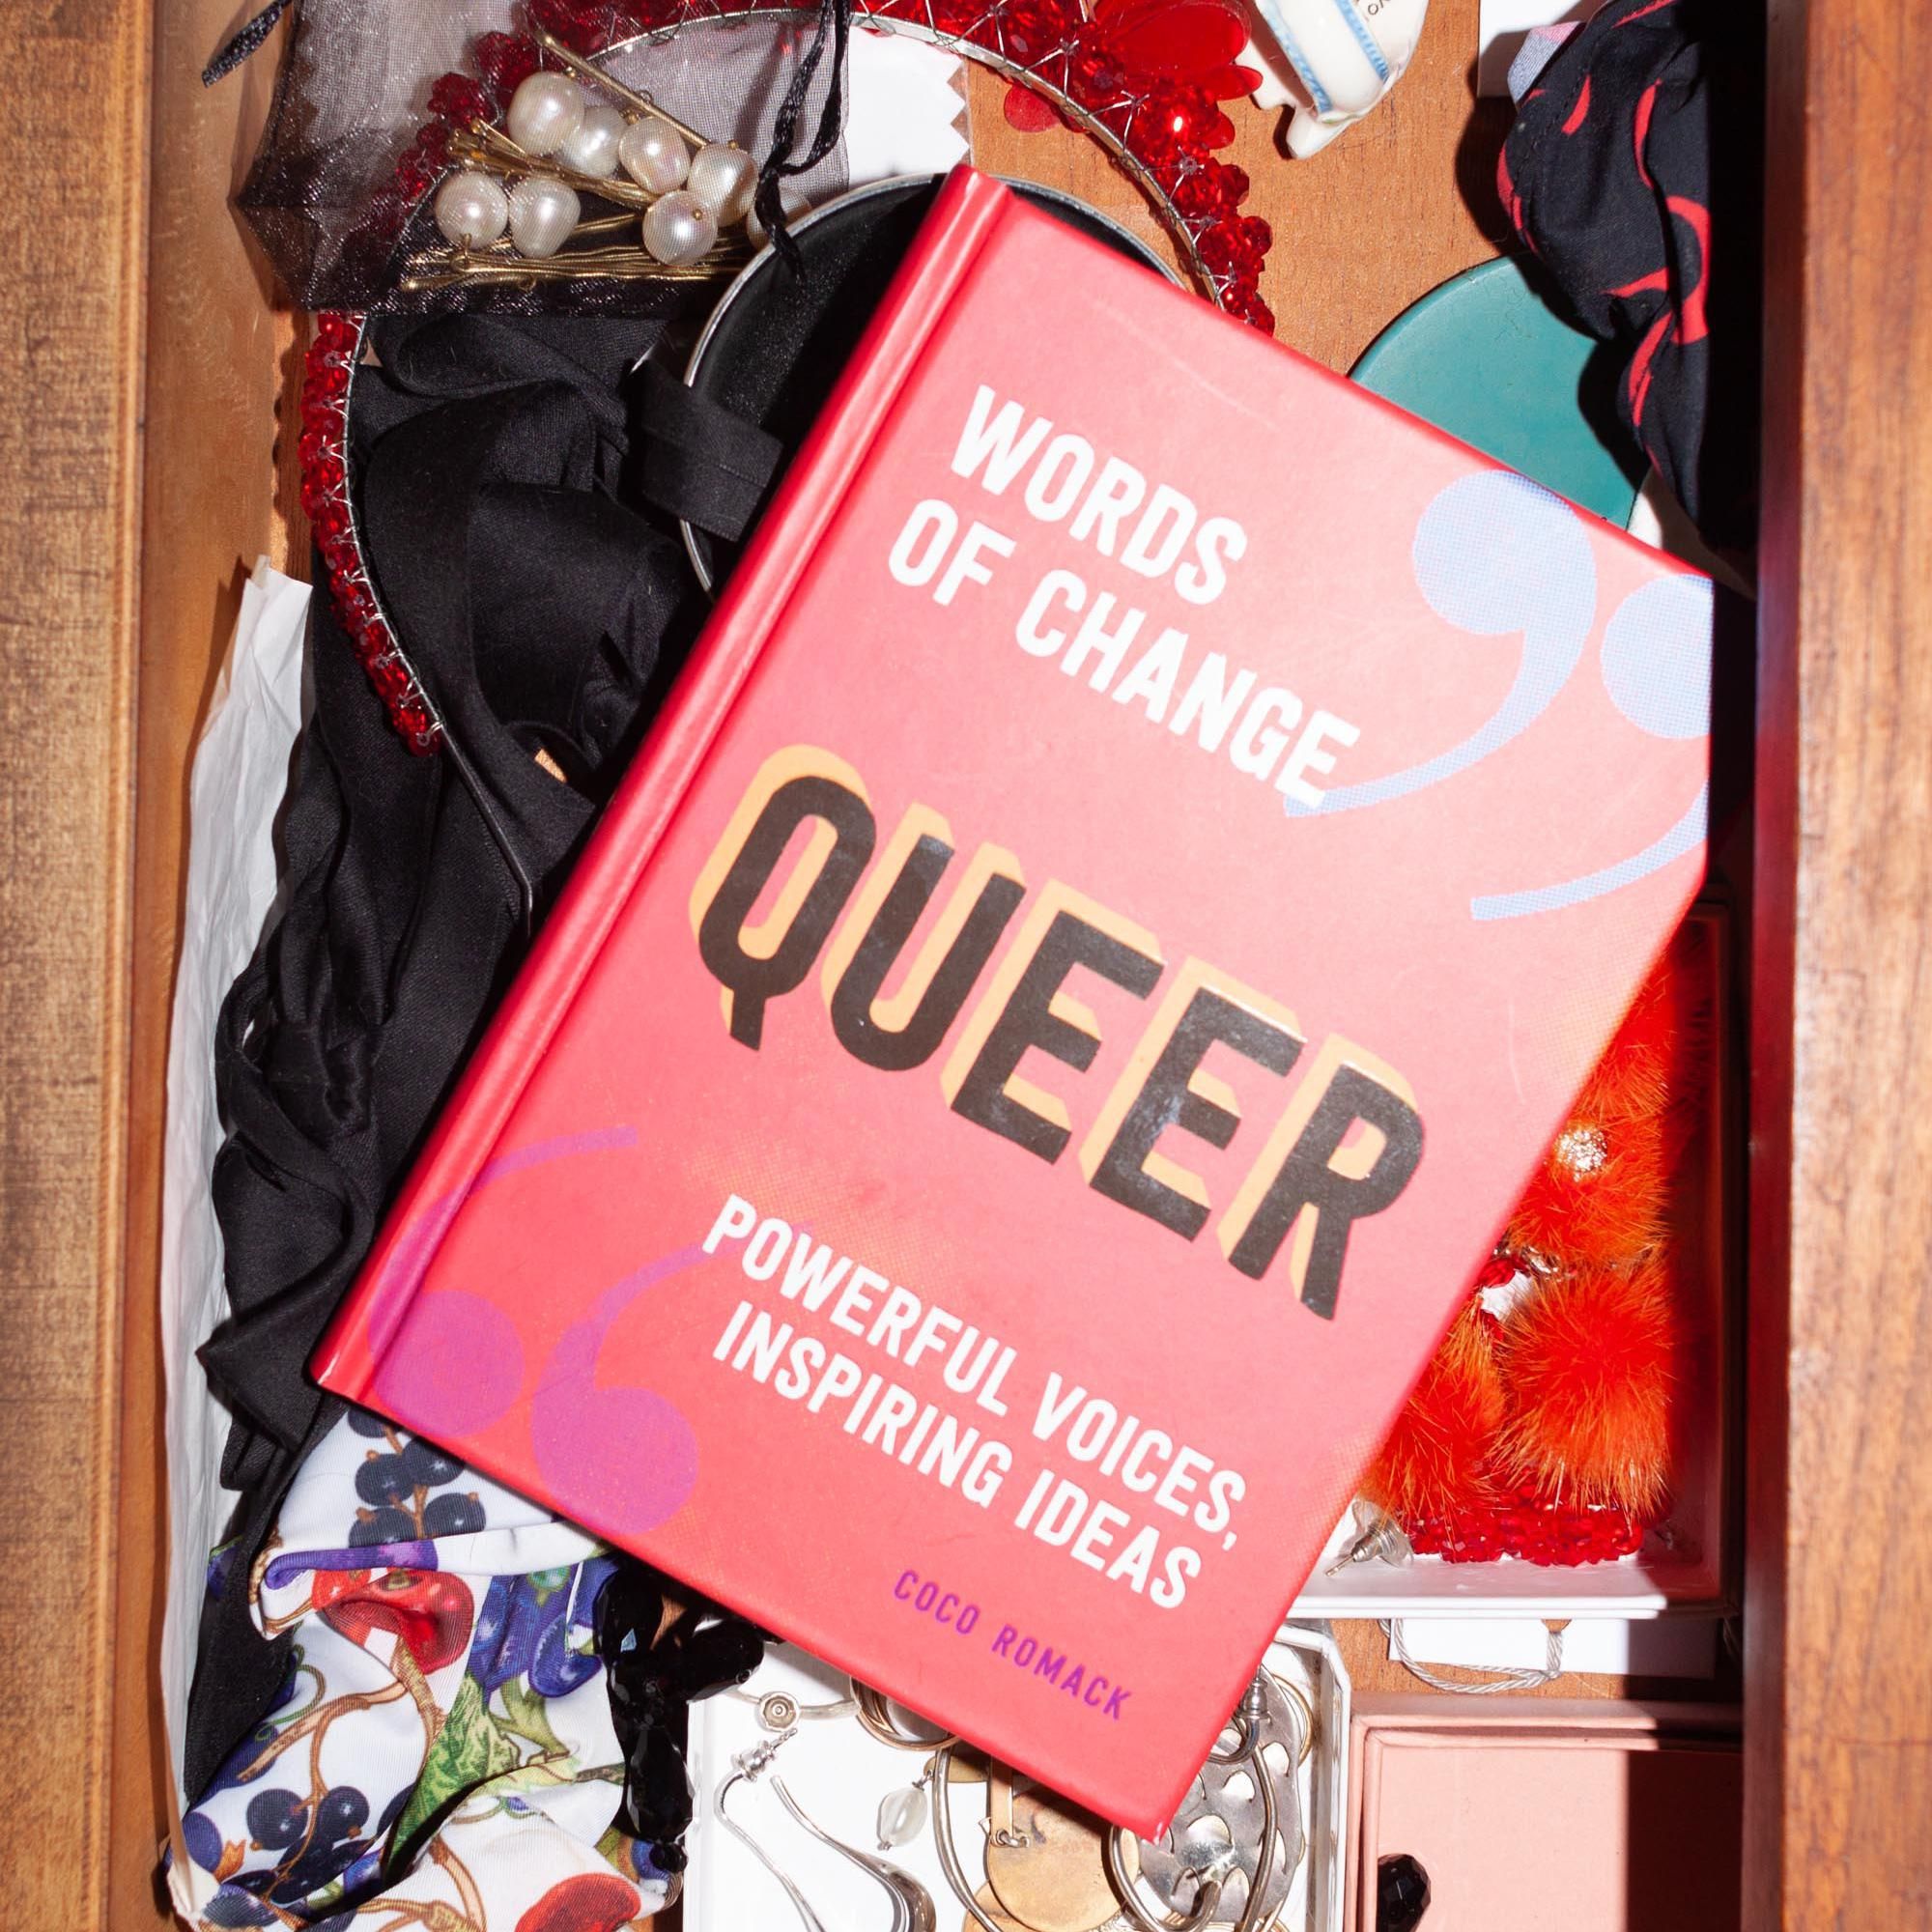 Queer (Words of Change Series) by Coco Romack